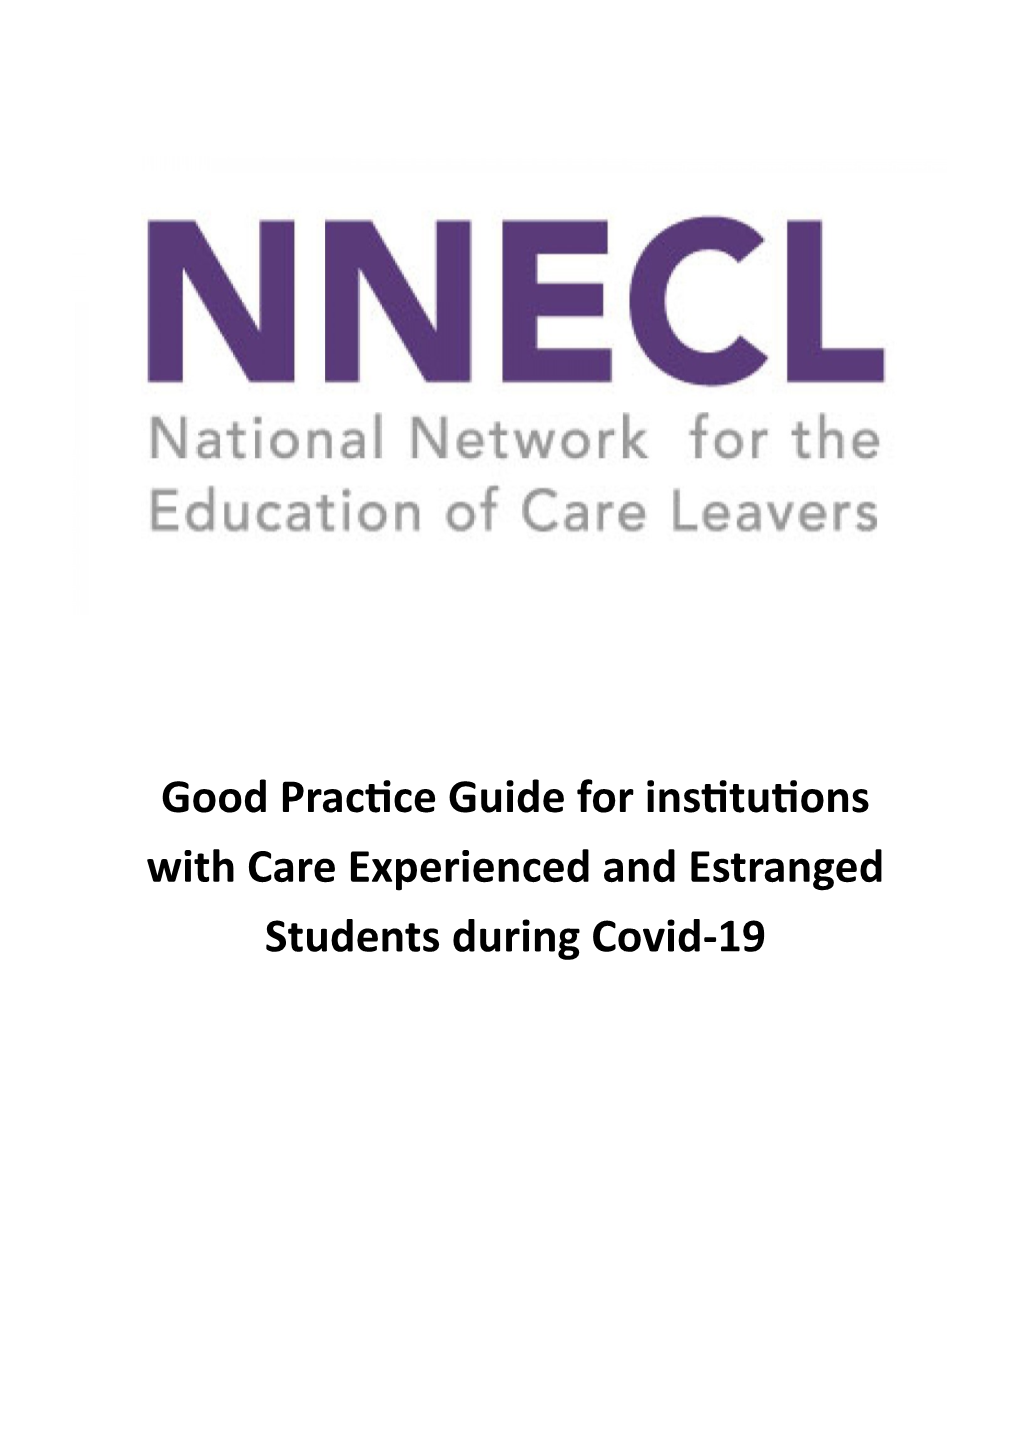 NNECL Good Practice Guide for Institutions with Care Experienced